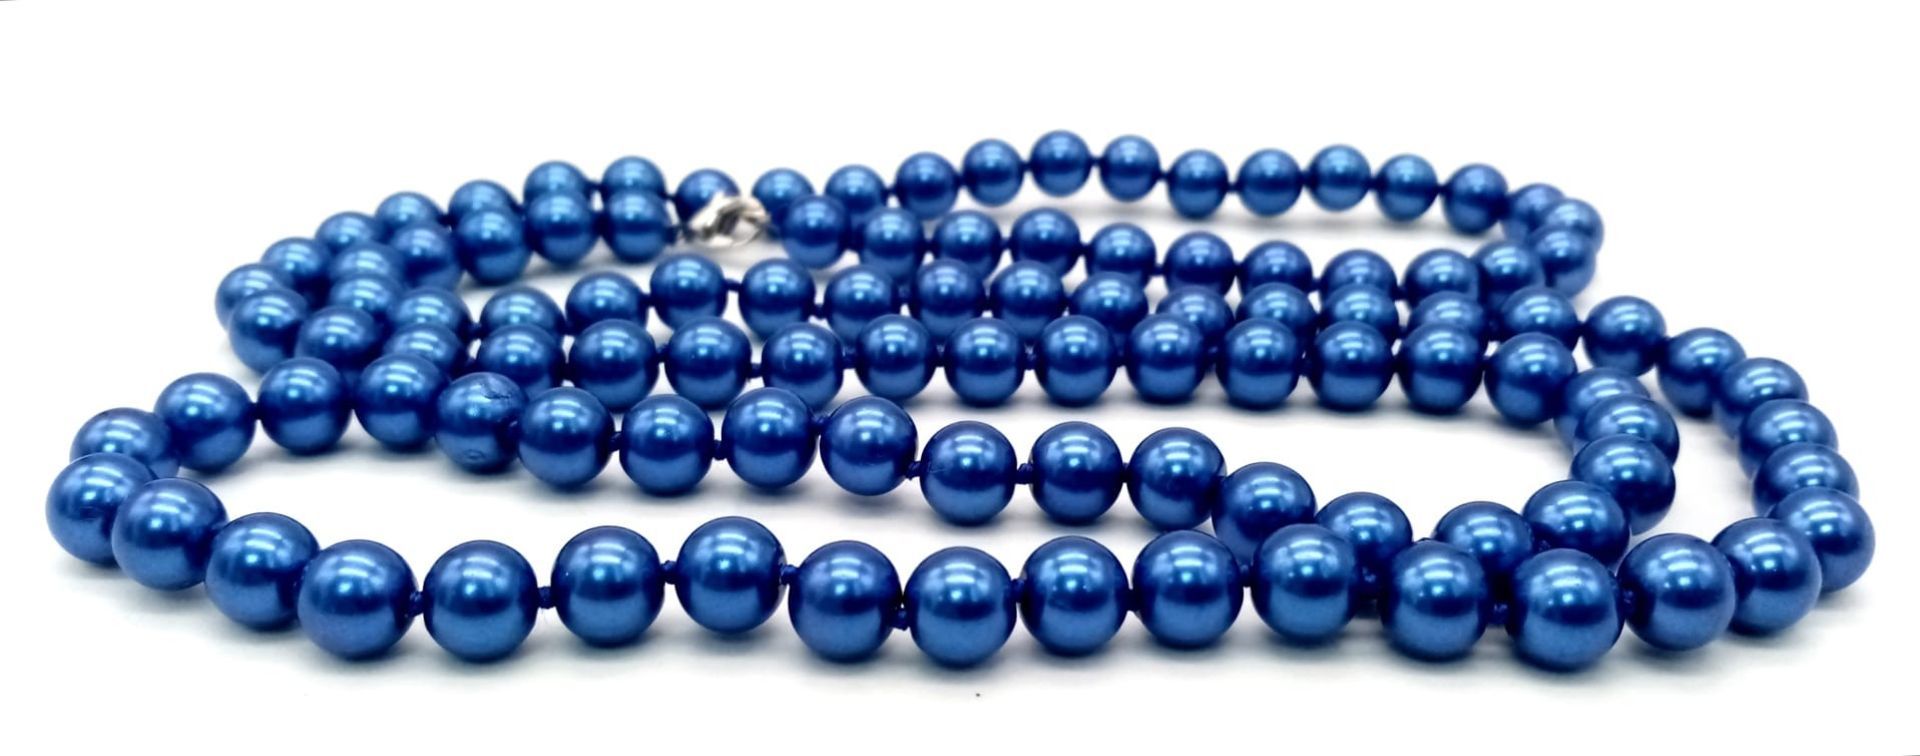 A Matinee Length Metallic Blue South Sea Pearl Shell Necklace. Beads - 8mm. Necklace length - 88cm. - Image 3 of 3